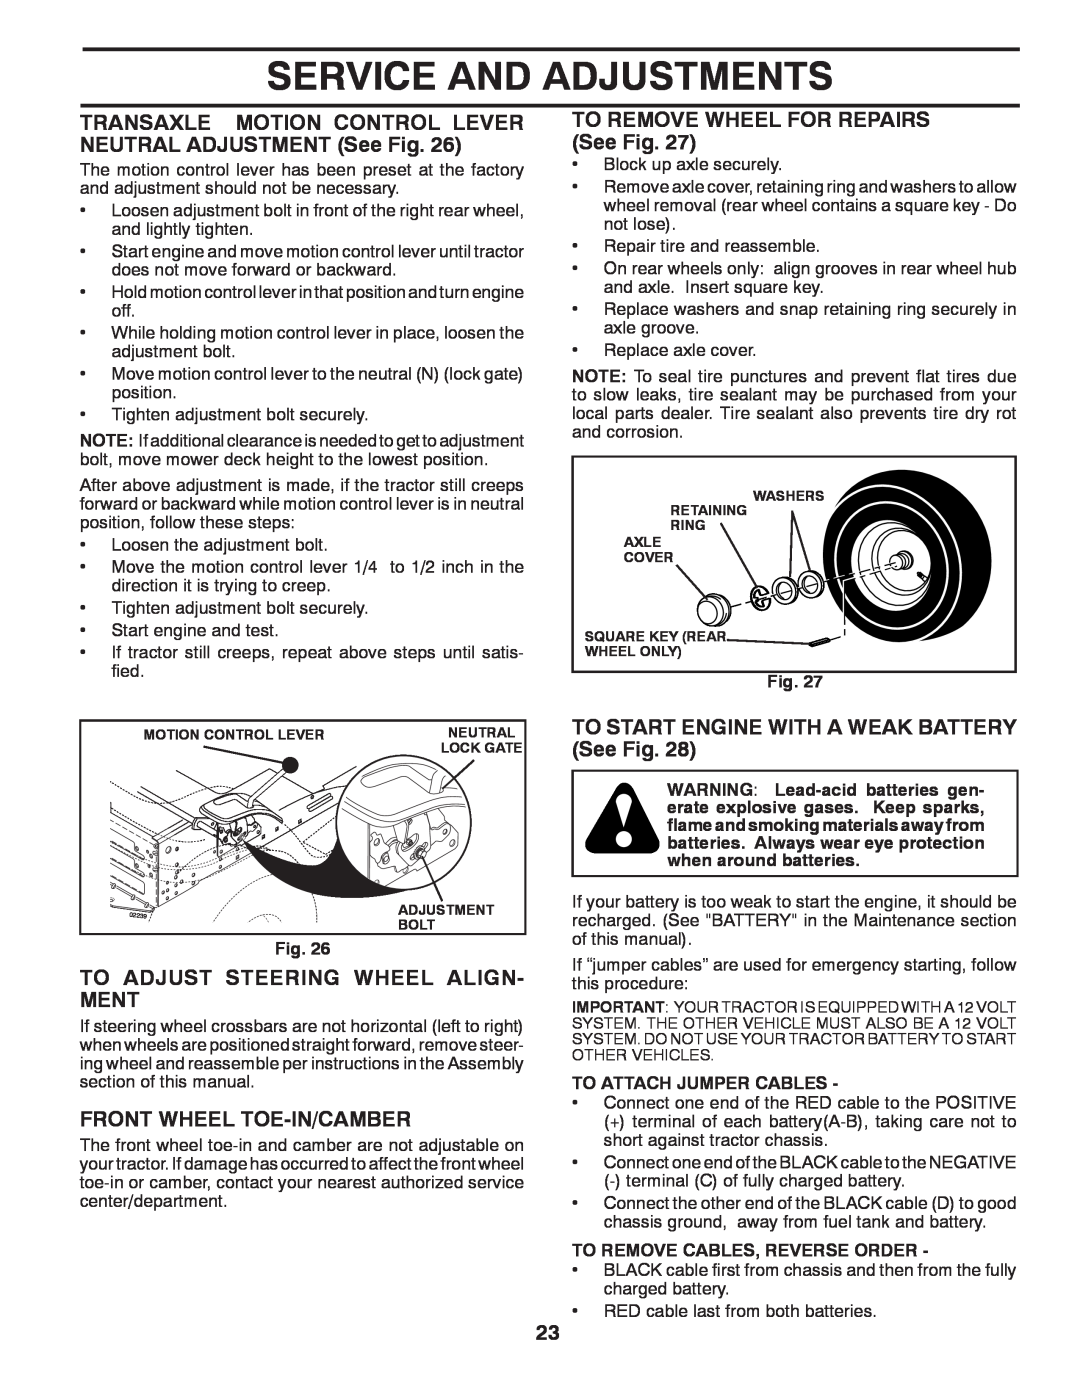 McCulloch M19542H To Adjust Steering Wheel Align- Ment, Front Wheel Toe-In/Camber, TO REMOVE WHEEL FOR REPAIRS See Fig 